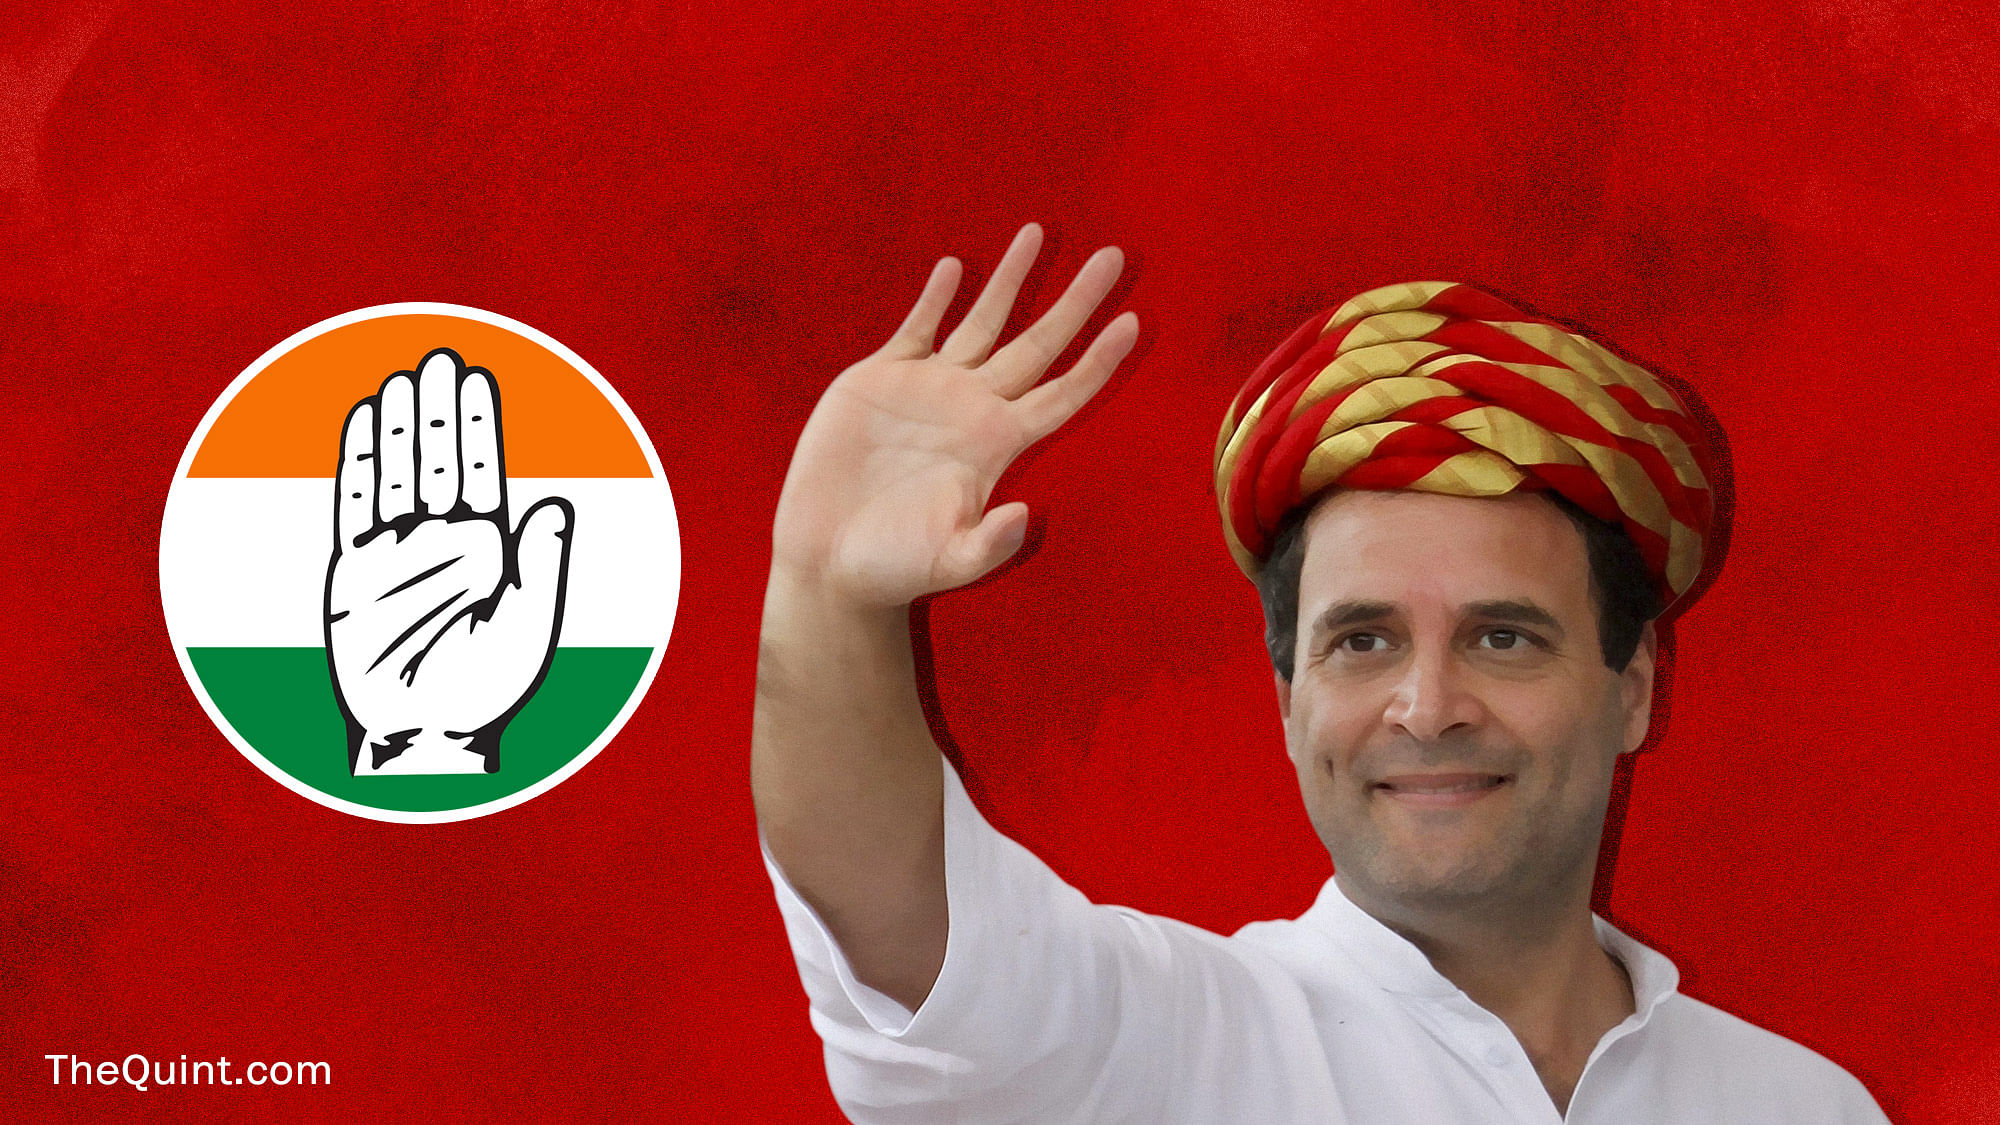 Congress is likely to formally announce Rahul Gandhi’s elevation to the post of the party’s president today&nbsp;